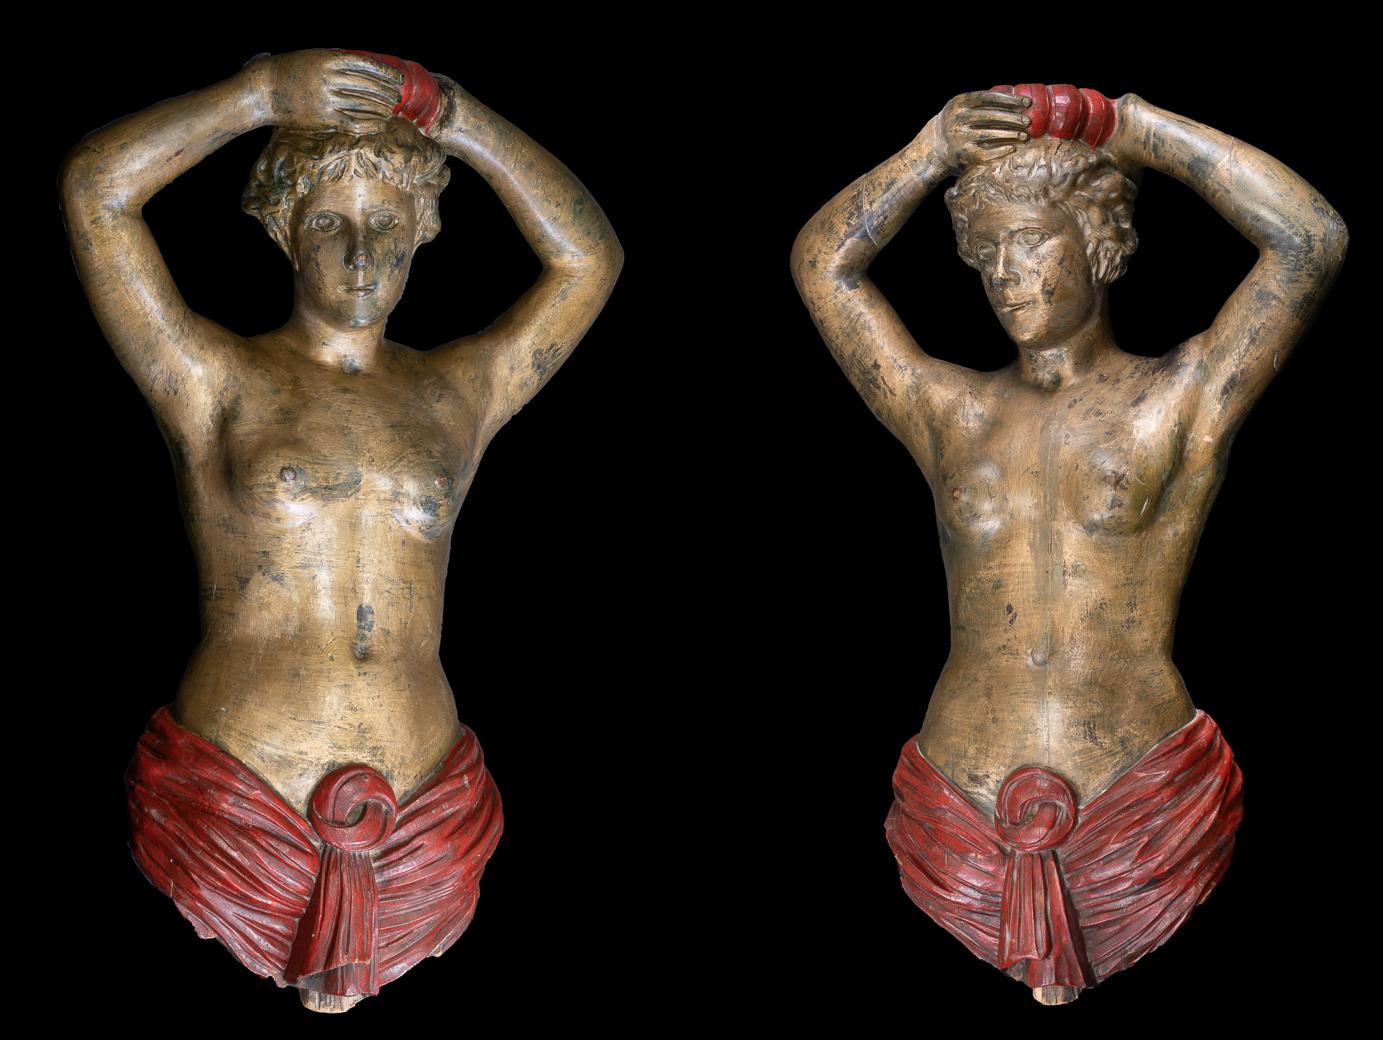 Pair of 19th C Carousel Decorative Female Torsos attributed to Charles I.D. Luff - Art by Charles I.D. Loof 